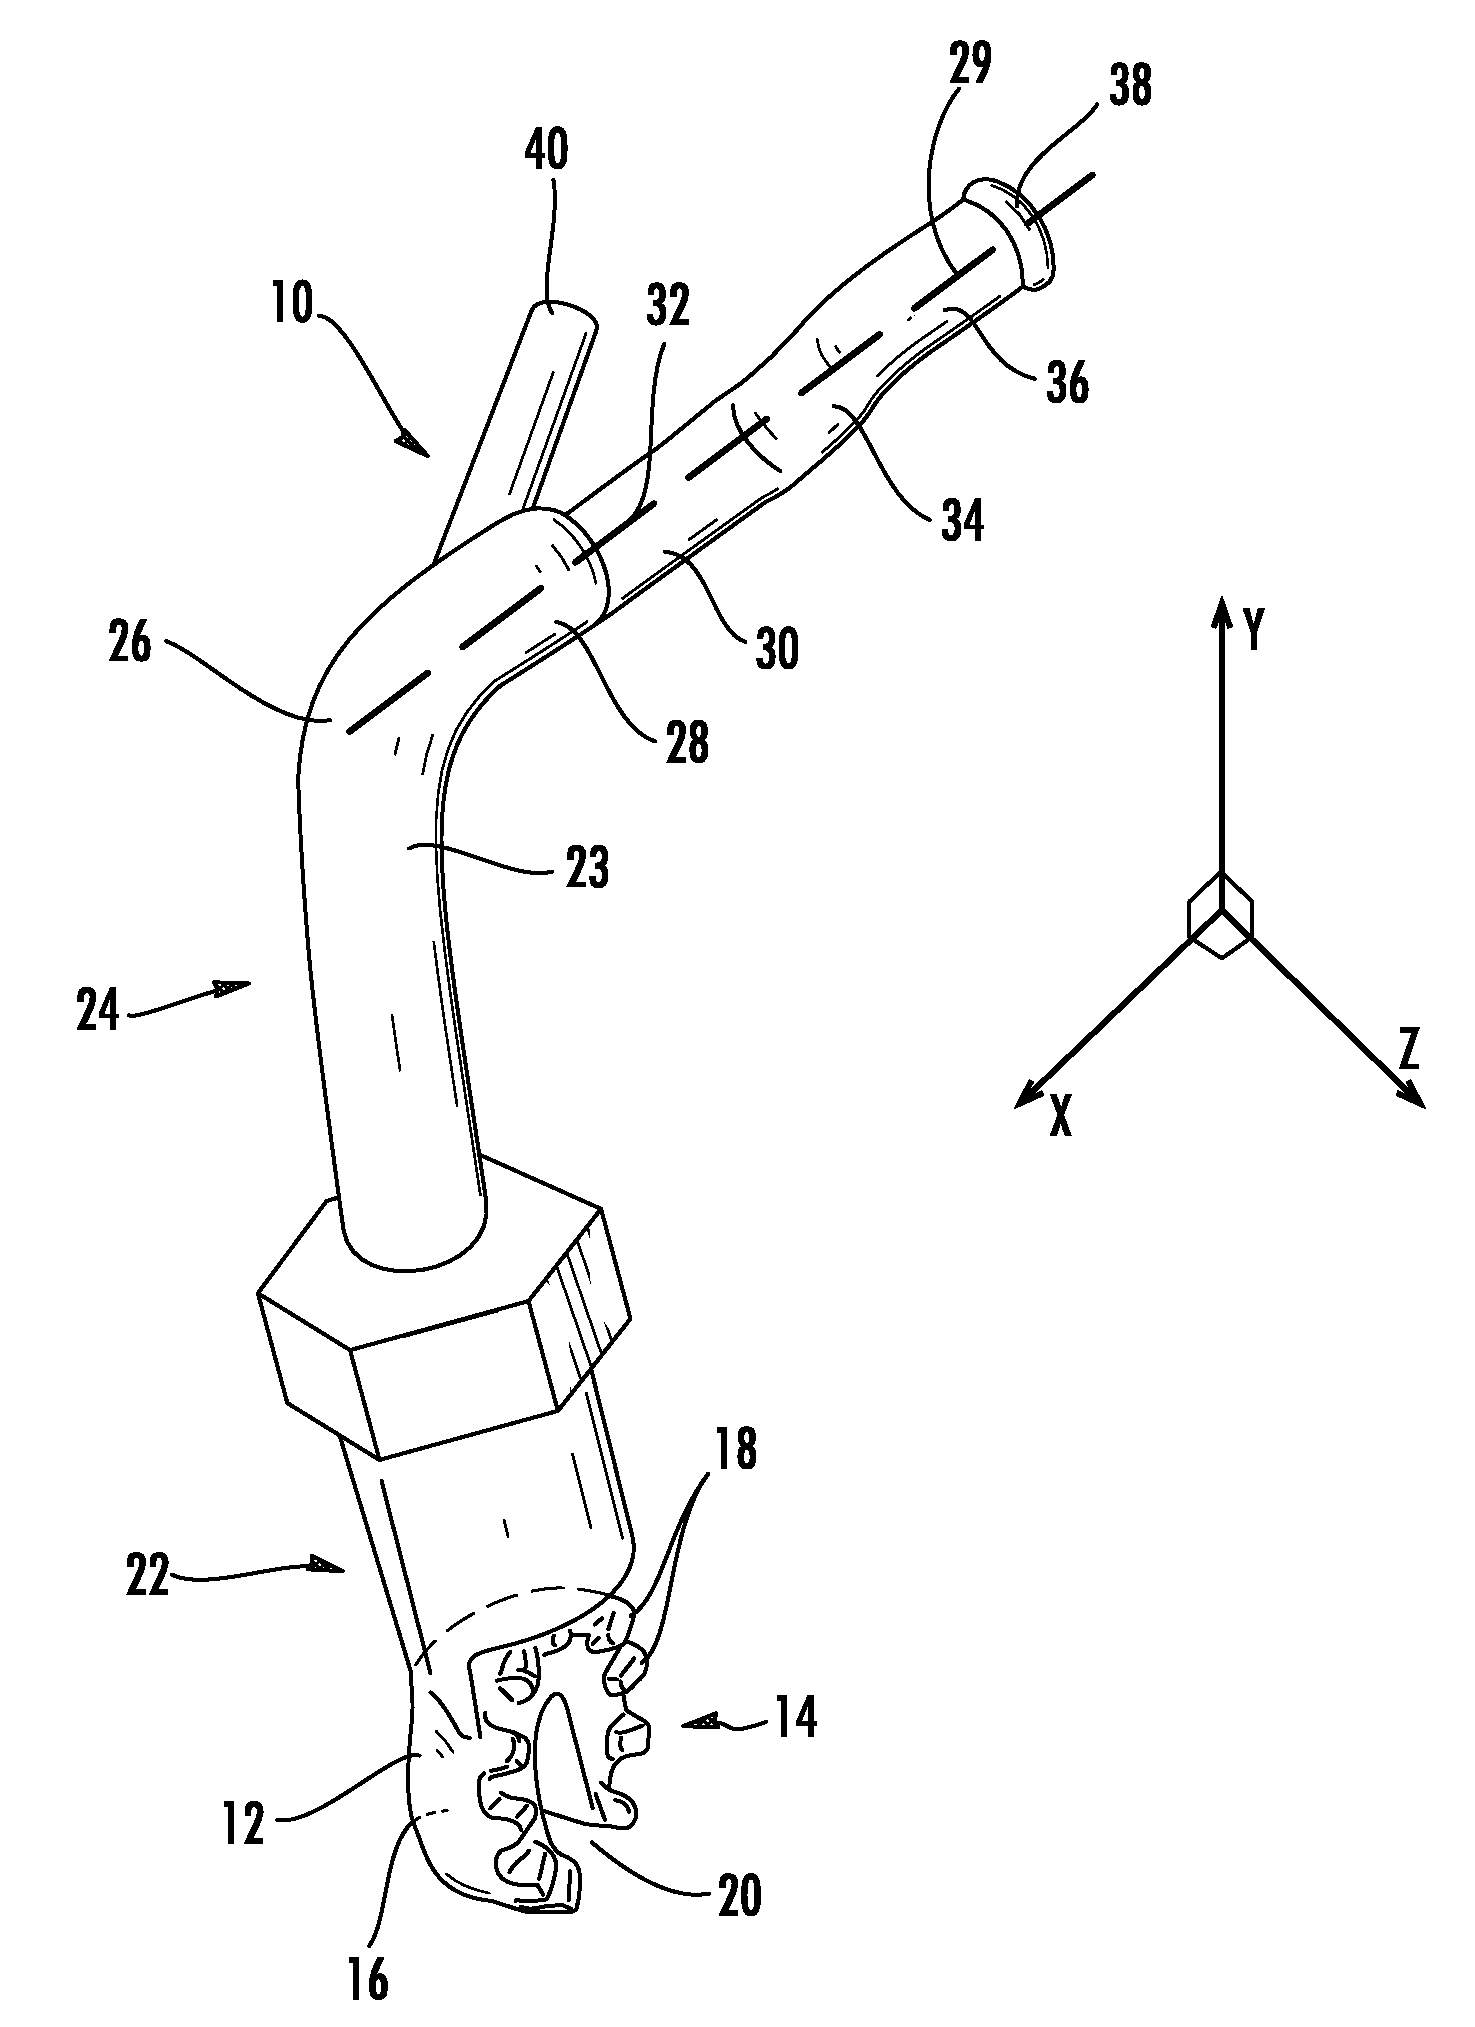 Pole-mounted hook device for electric utility applications